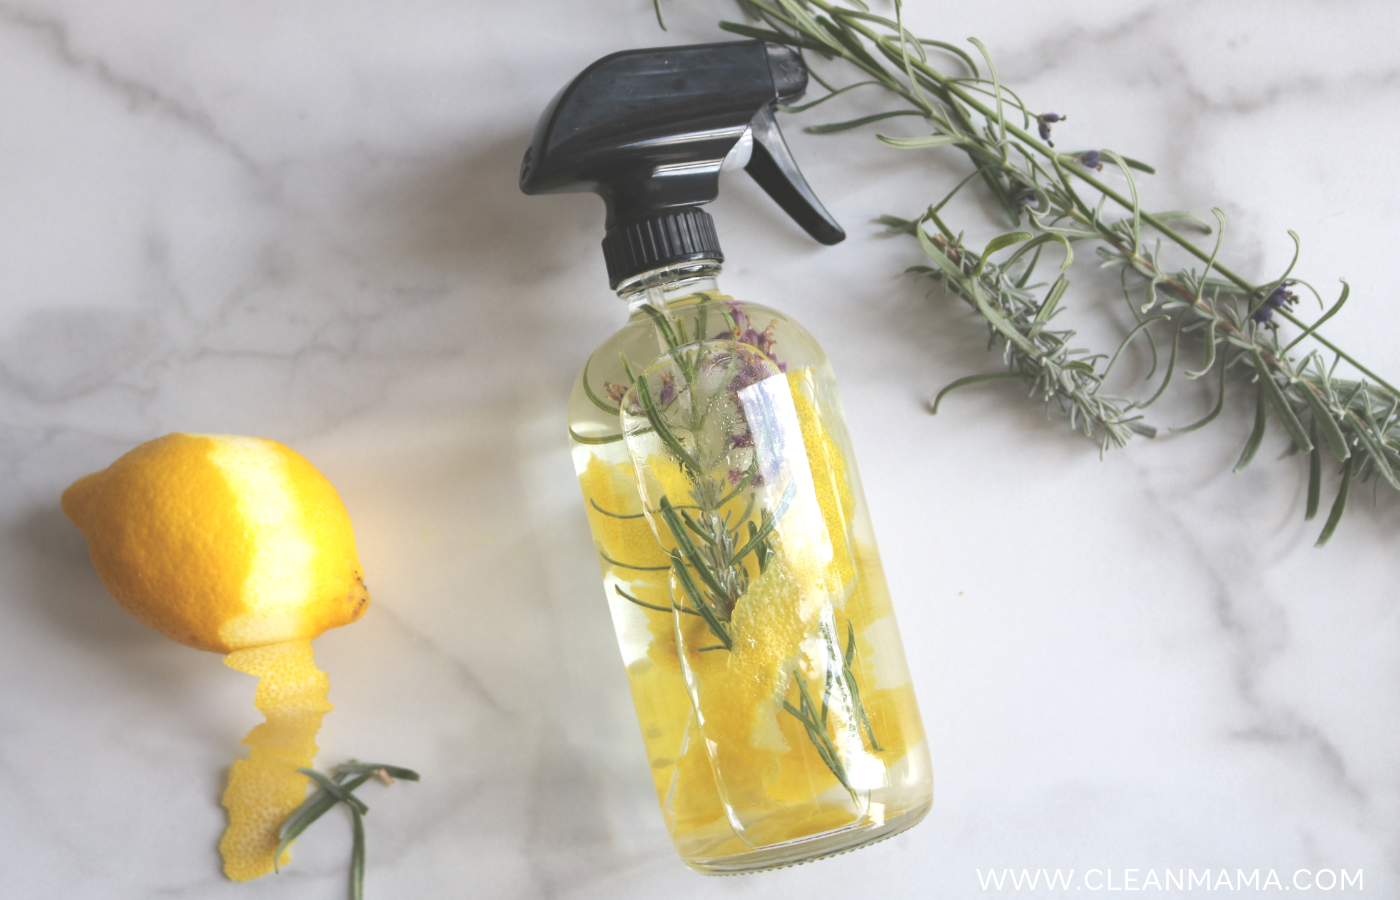 This Is The Best DIY Scented Vinegar For Cleaning.